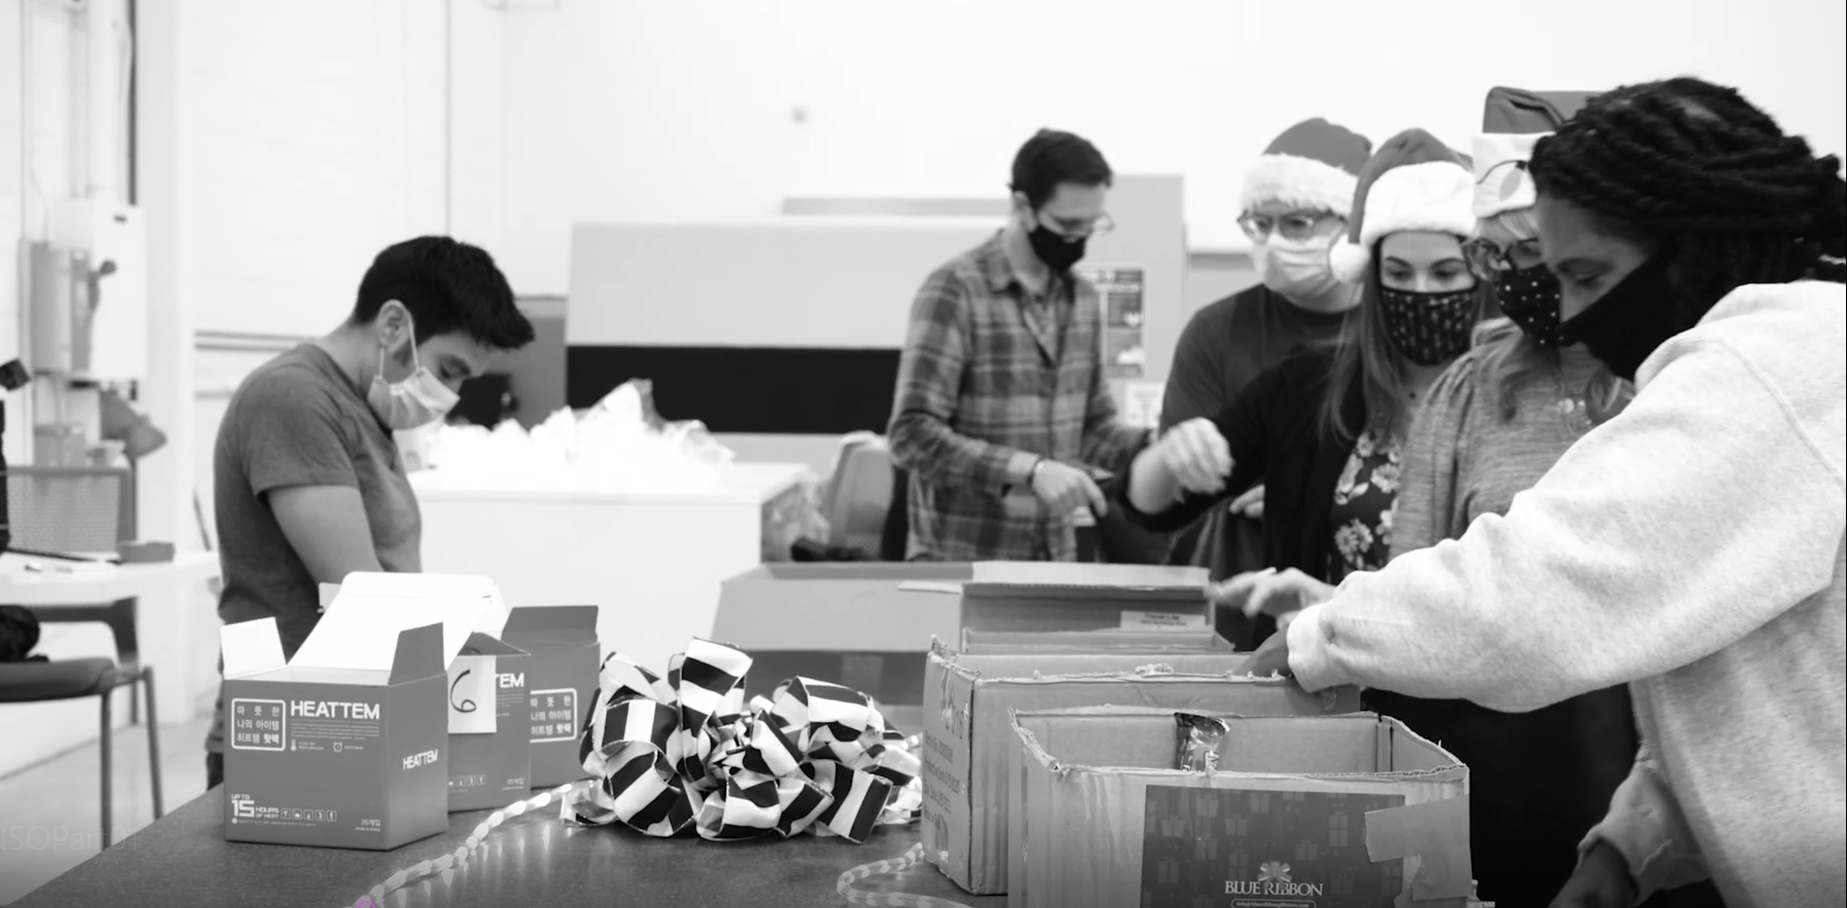 The team wrapping presents to take to a charitable organization.